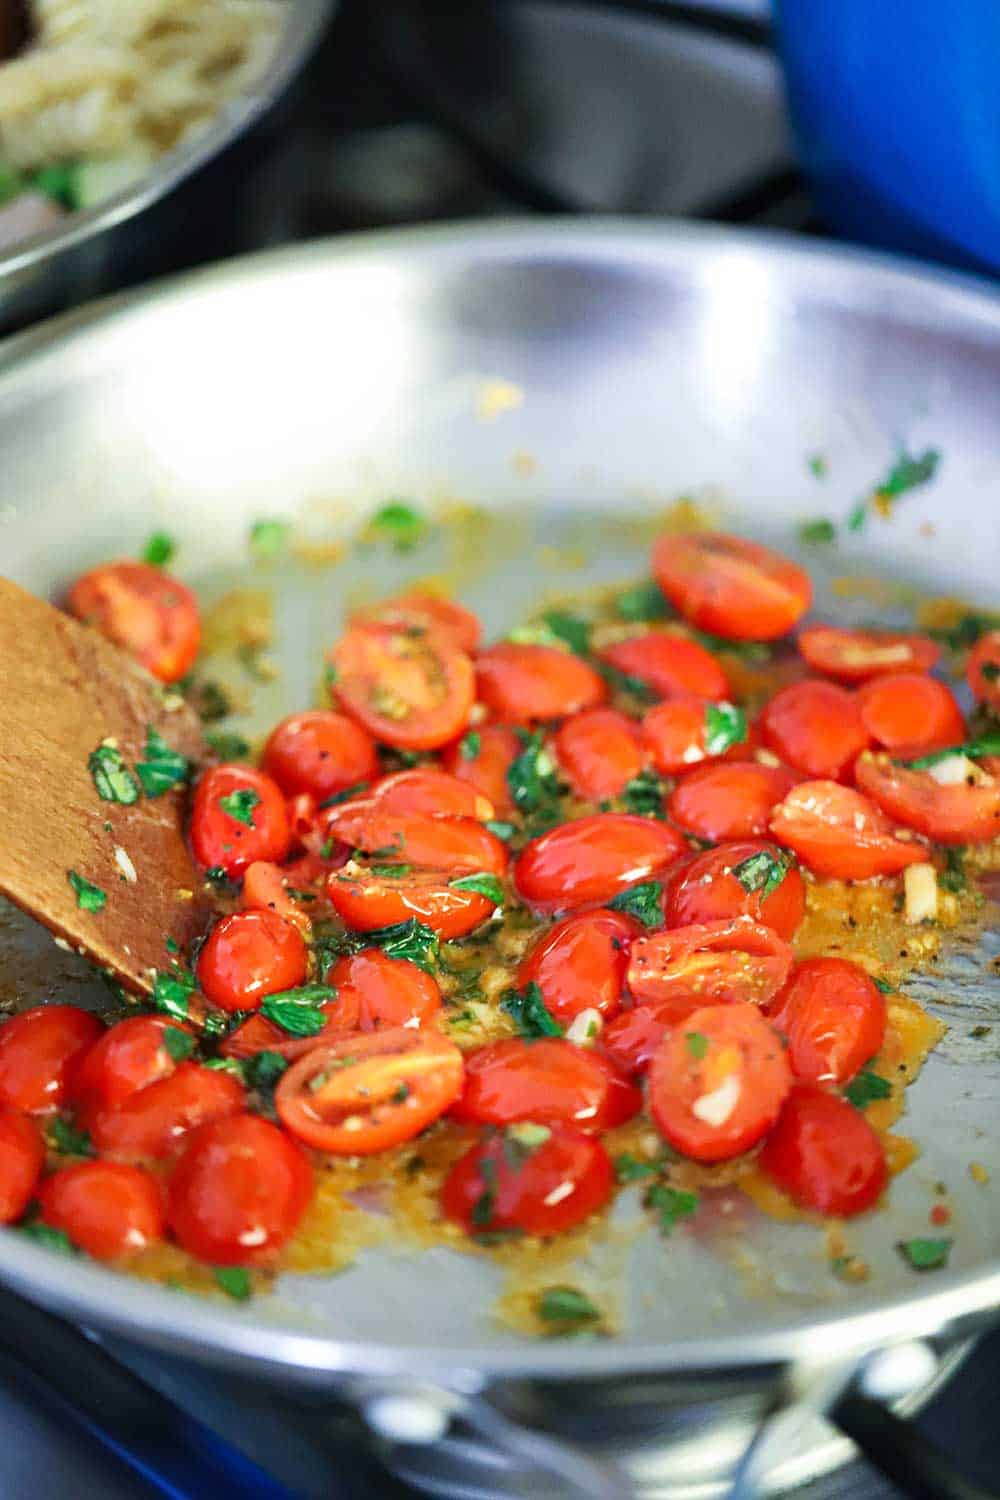 A steel saucepan filled with cherry tomatoes that have been halved and fresh basil.